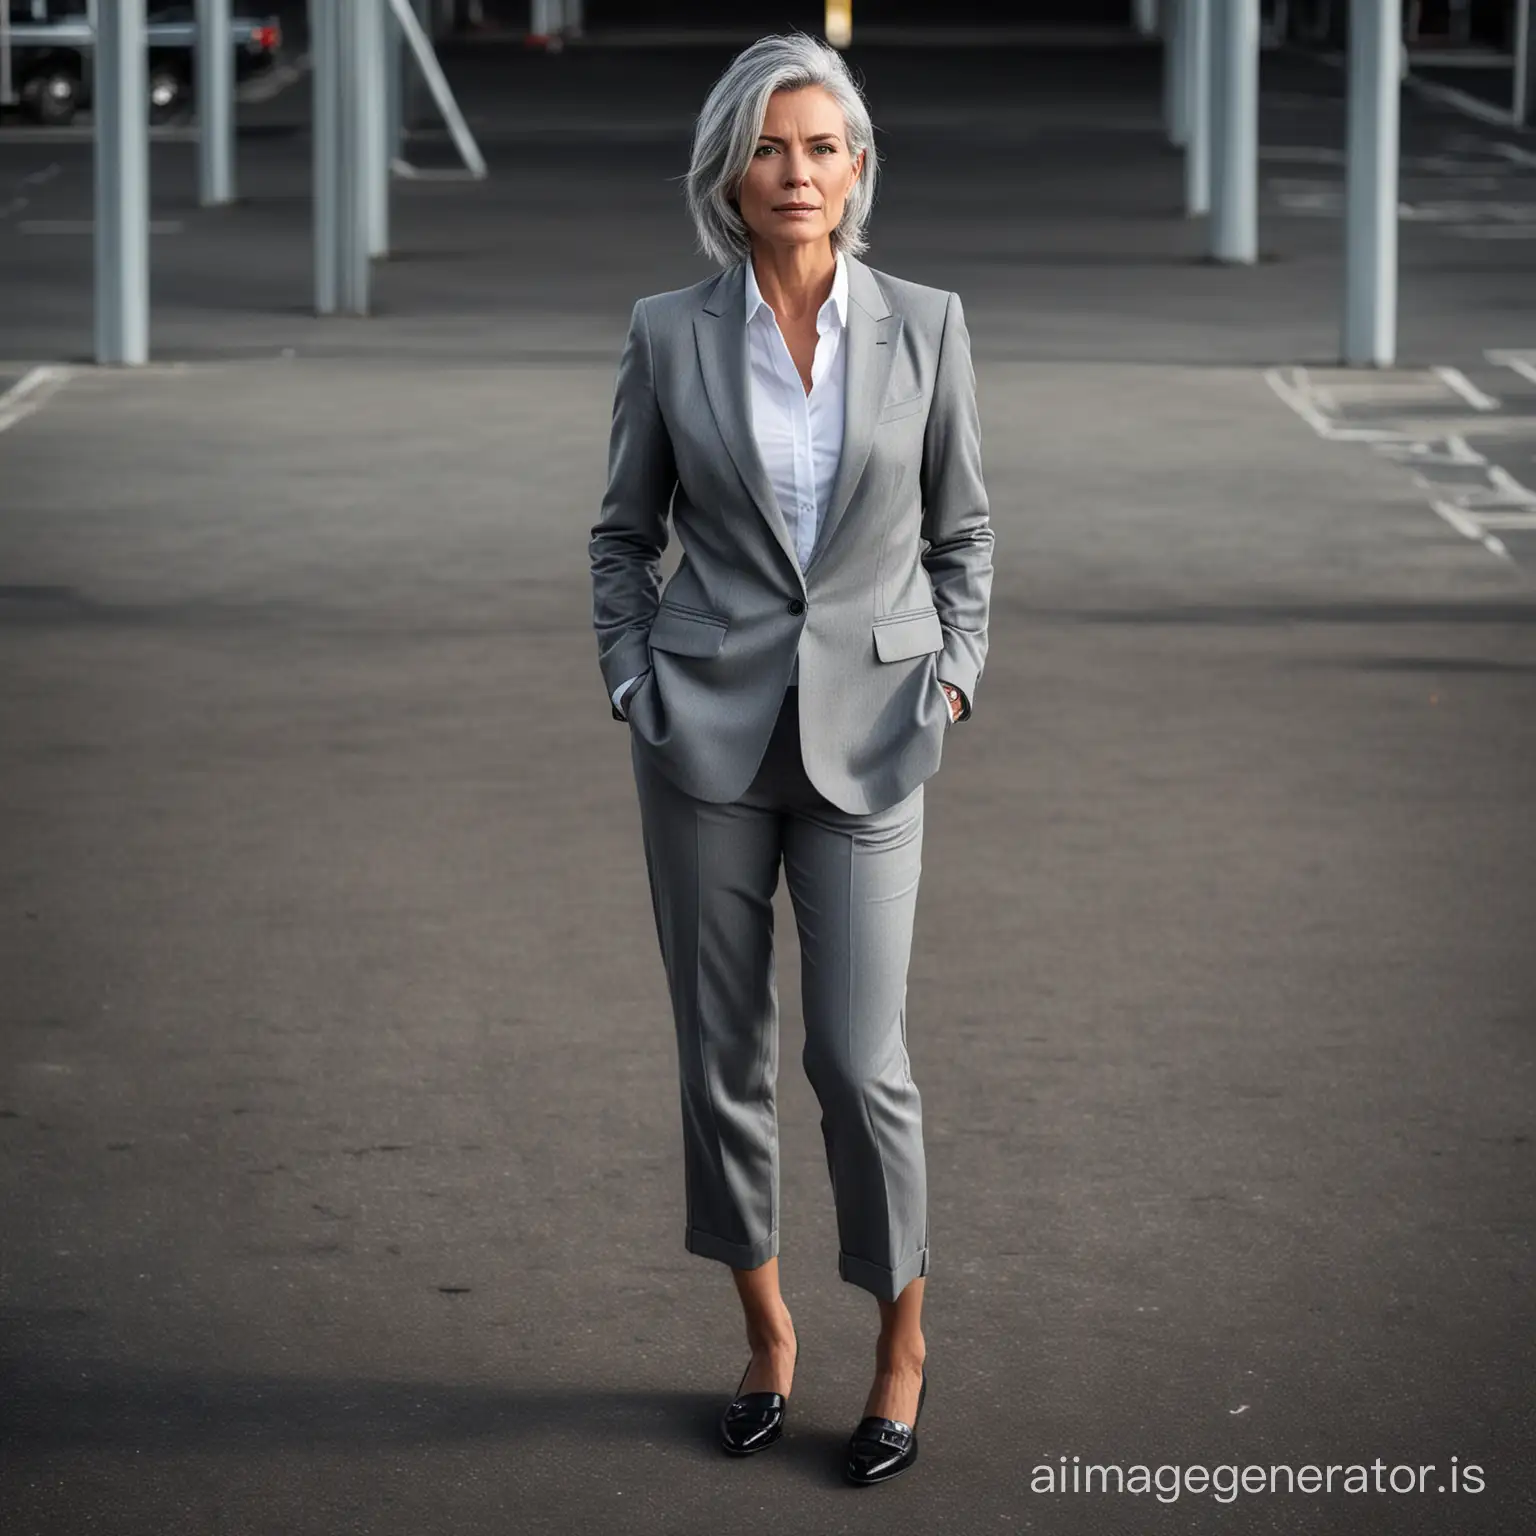 Stylish-Mature-Woman-in-Grey-Suit-Poses-Dramatically-in-Urban-Parking-Lot